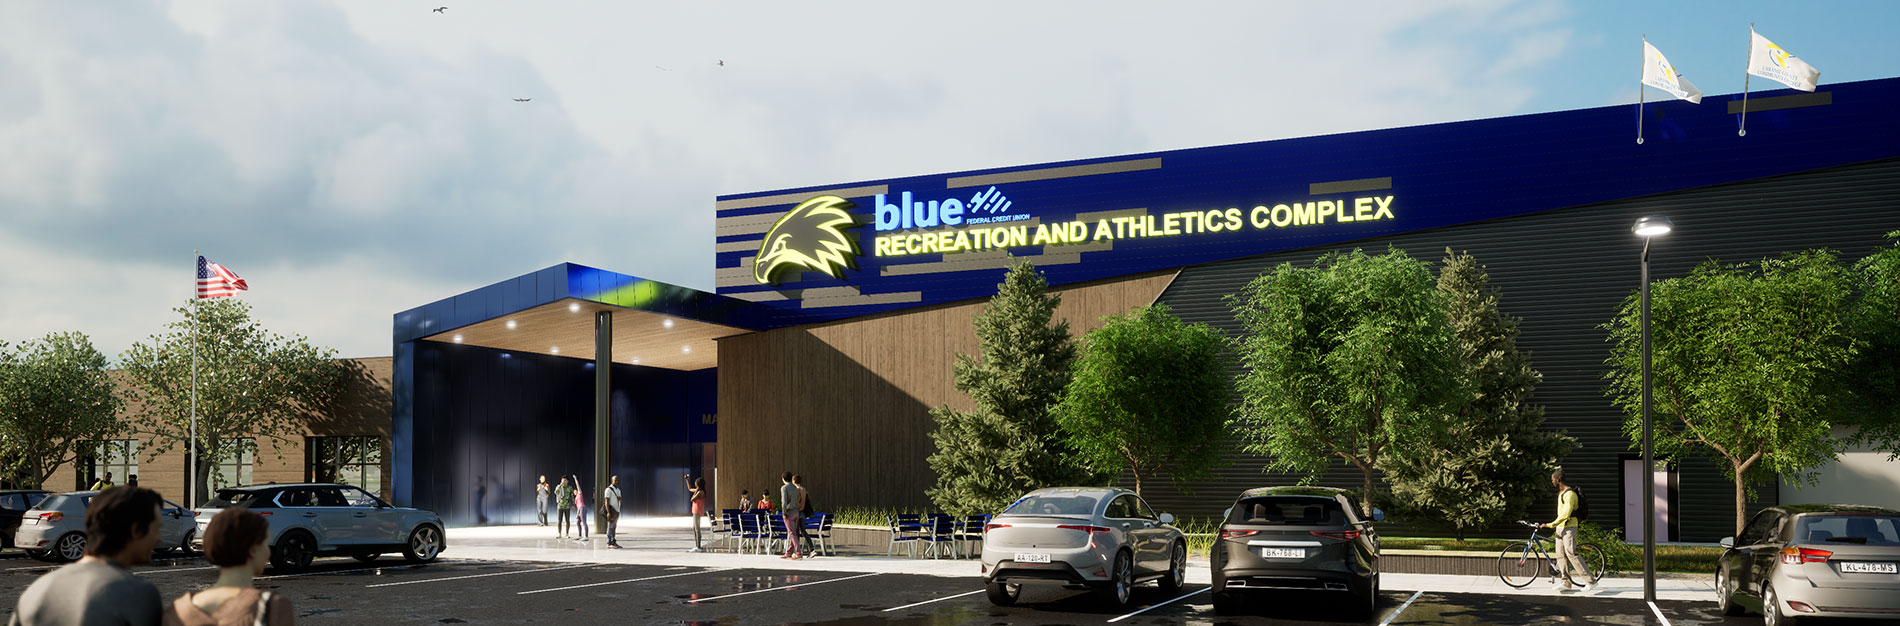 illustration of exterior of the RAC after the renovation with new signage and a defined entrance. This includes the logo for Blue Federal Credit Union who is a sponsor of the renovation.